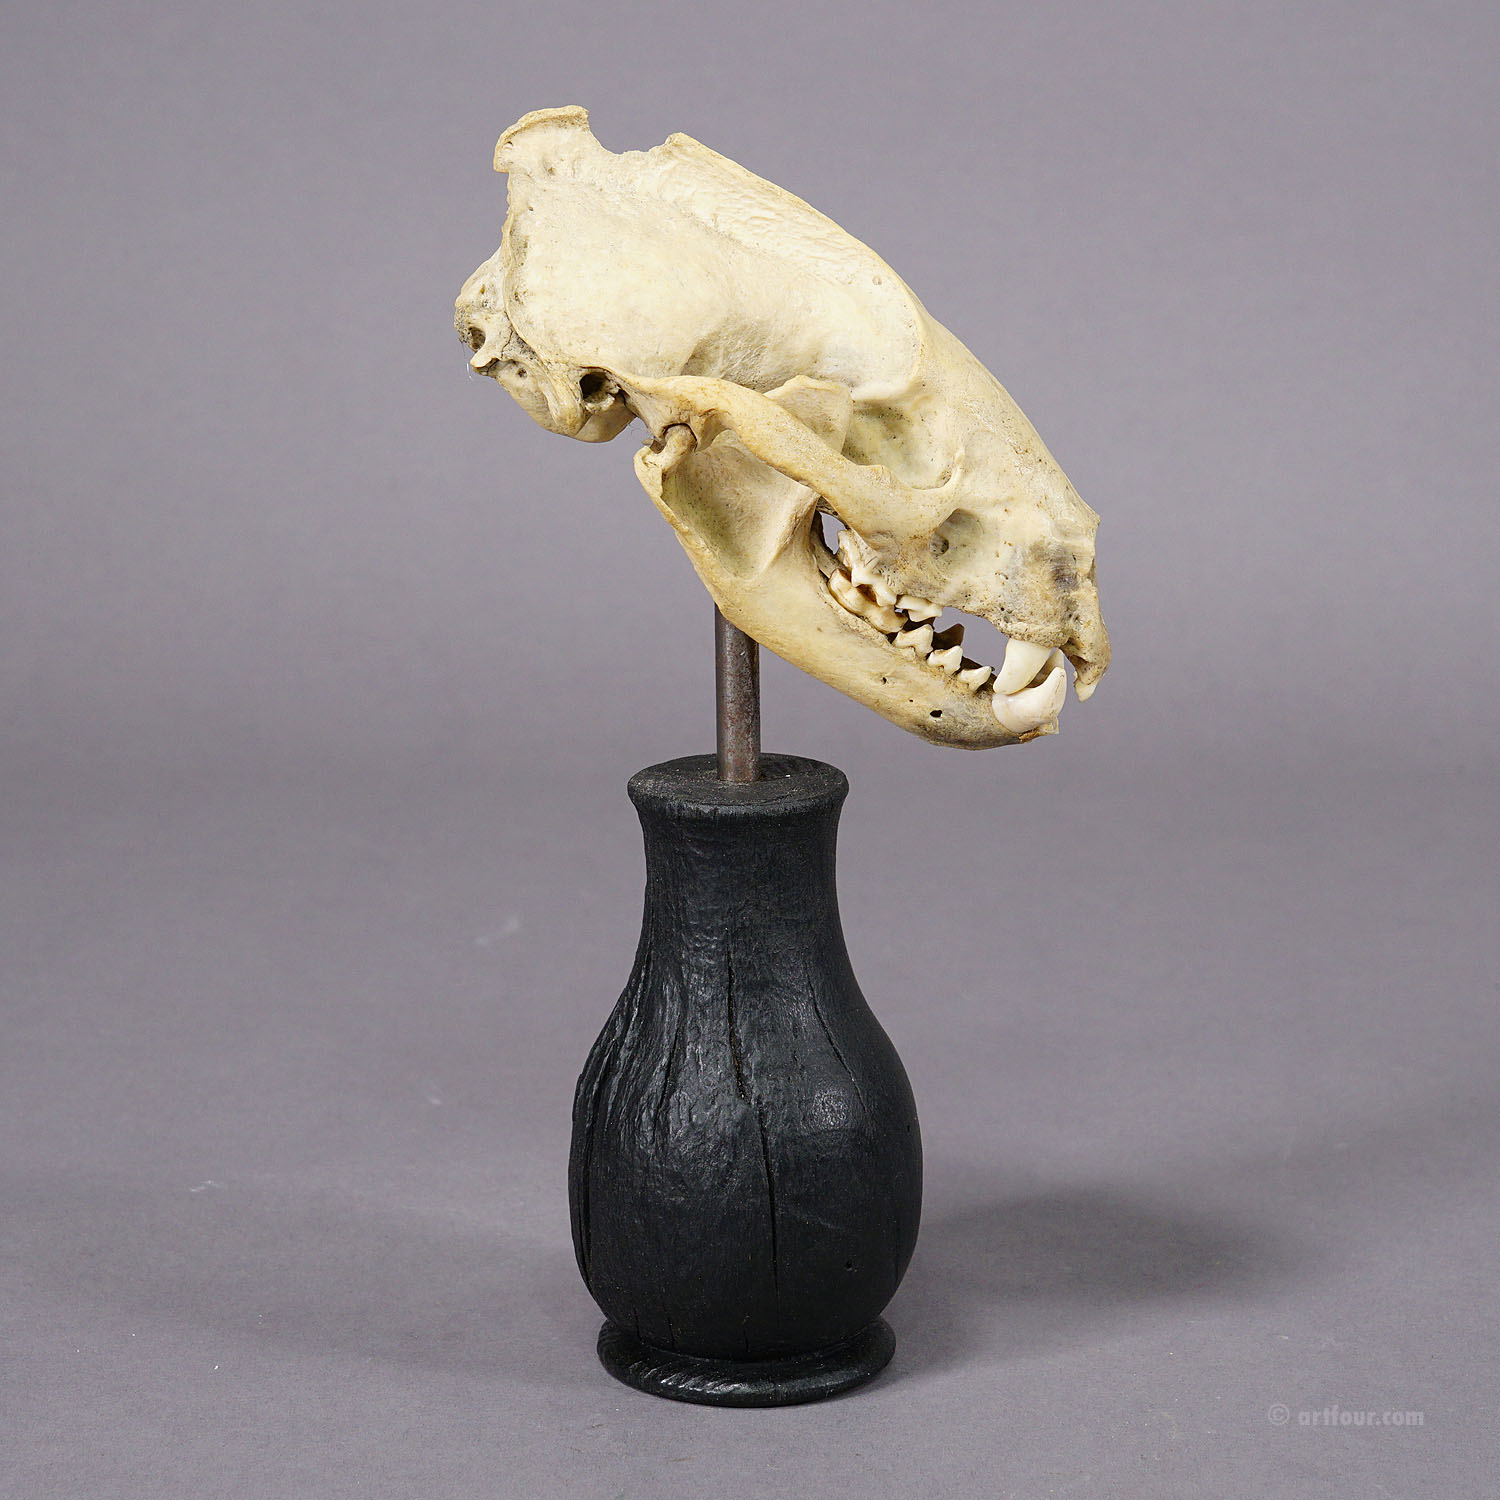 Antique Real Skull of a Badger, Germany ca. 1900s